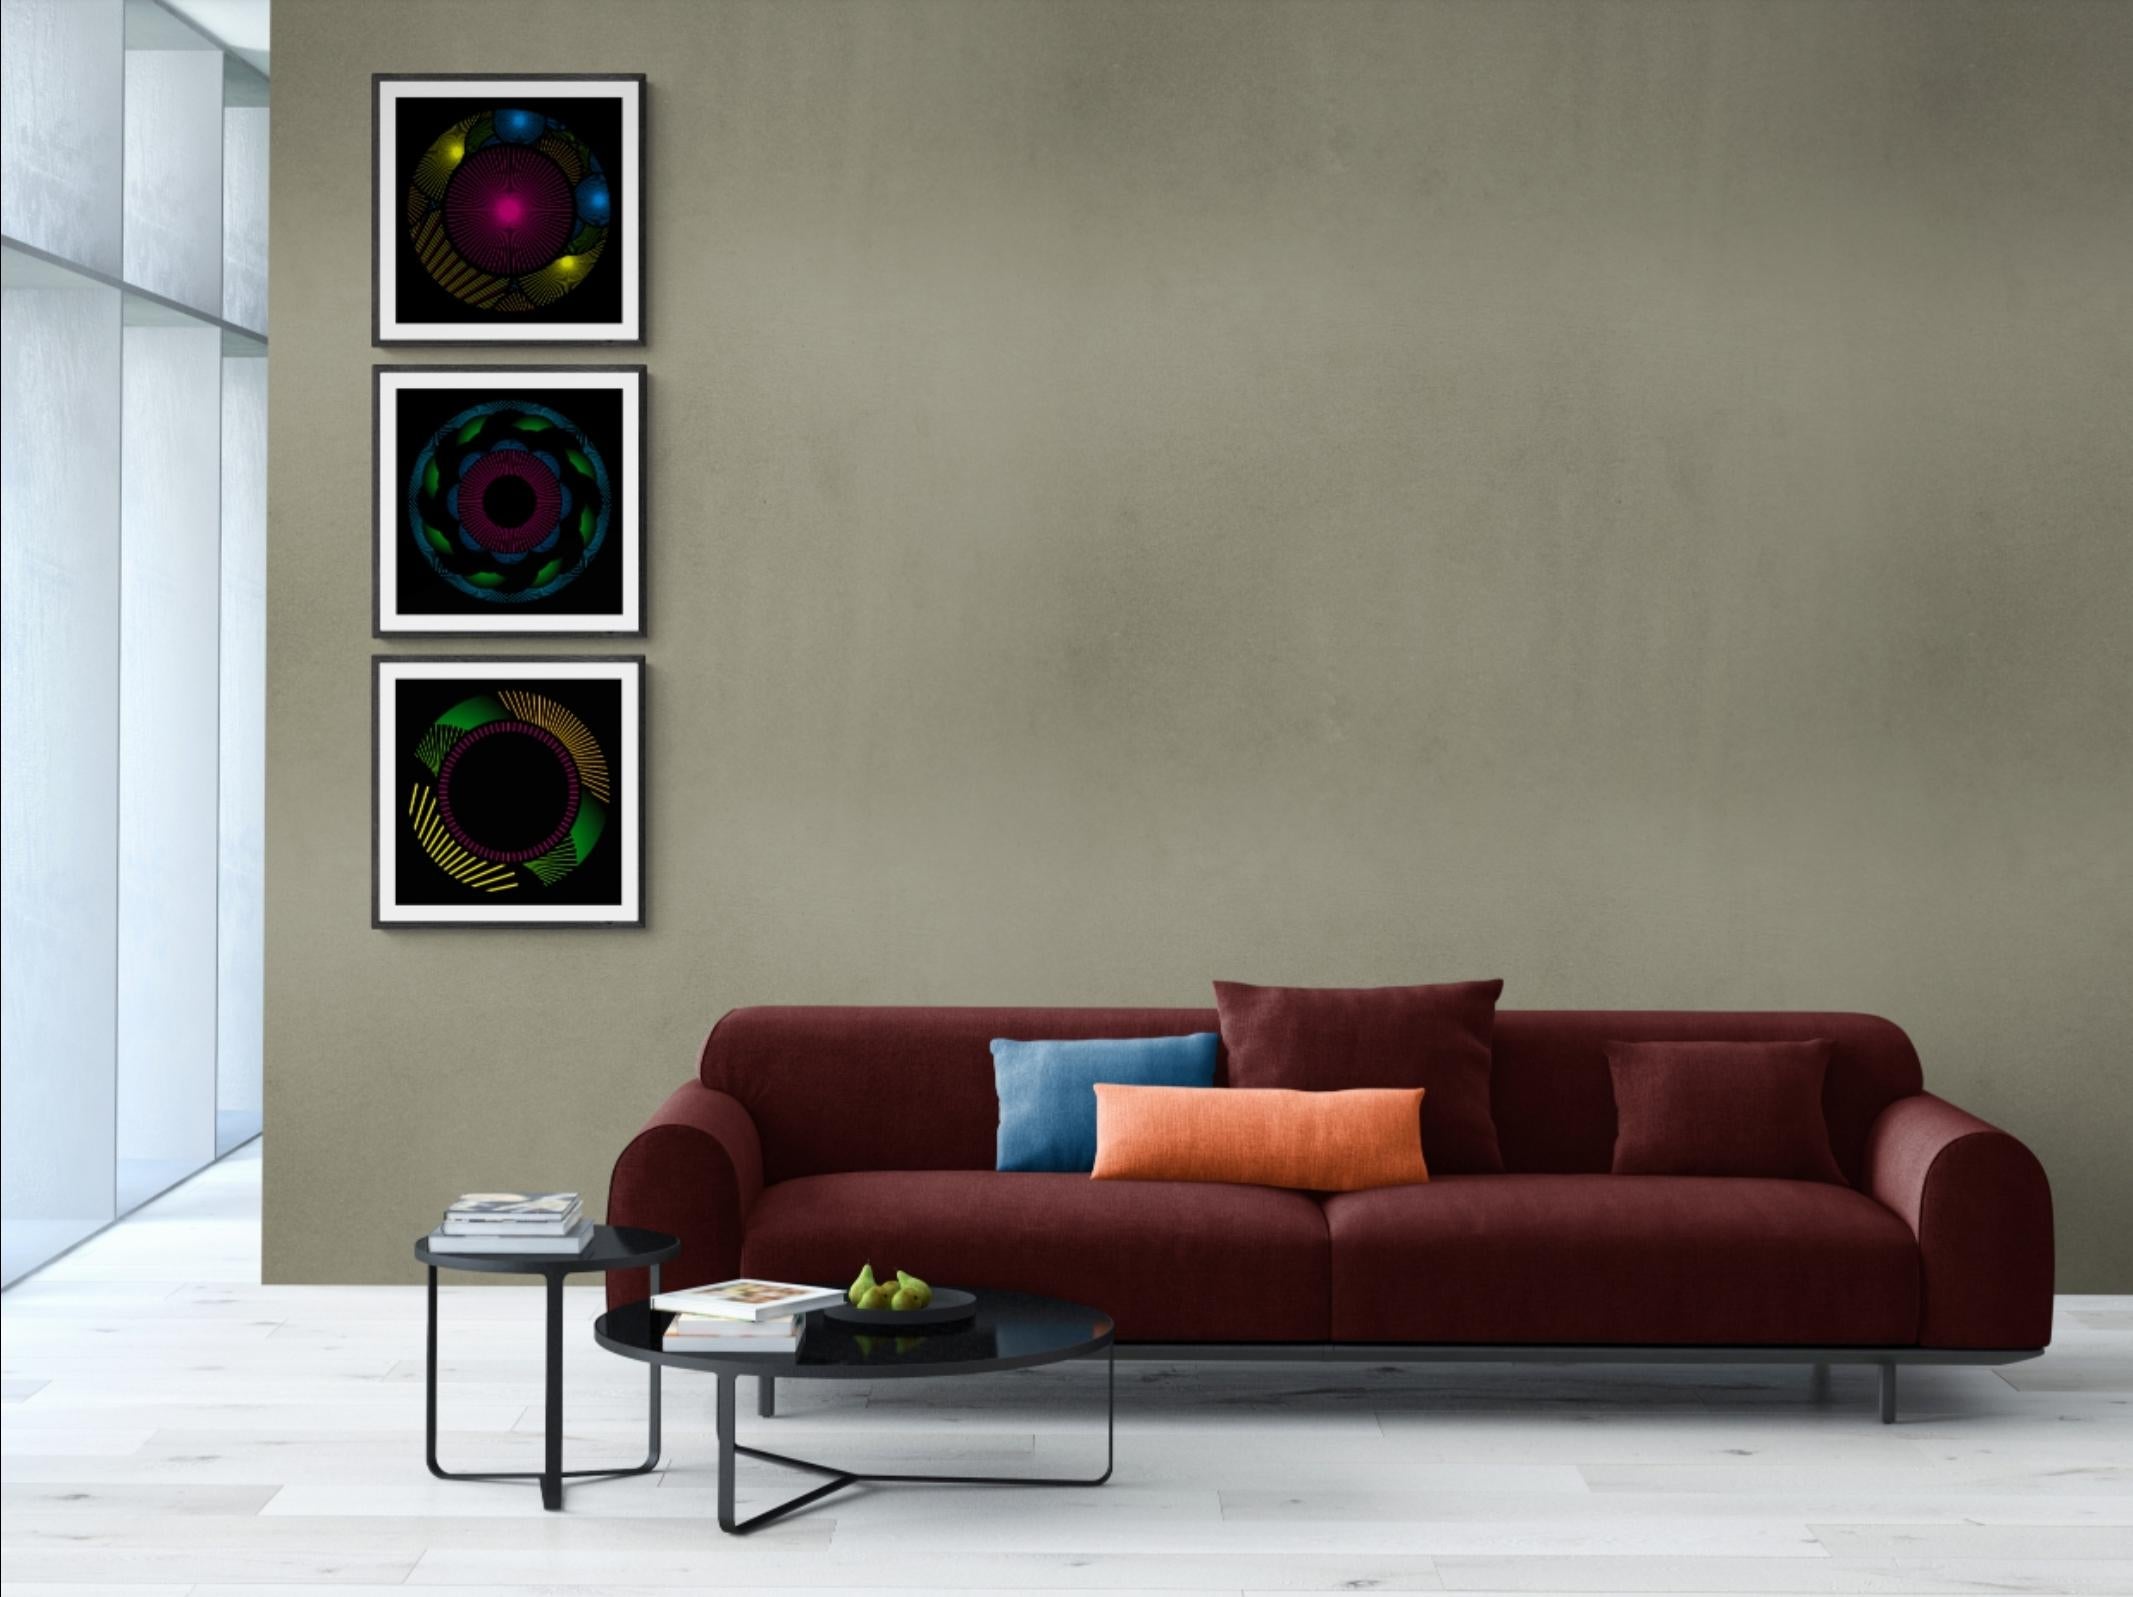 Nebulosa 27 - Black Abstract Print by Julio Campos